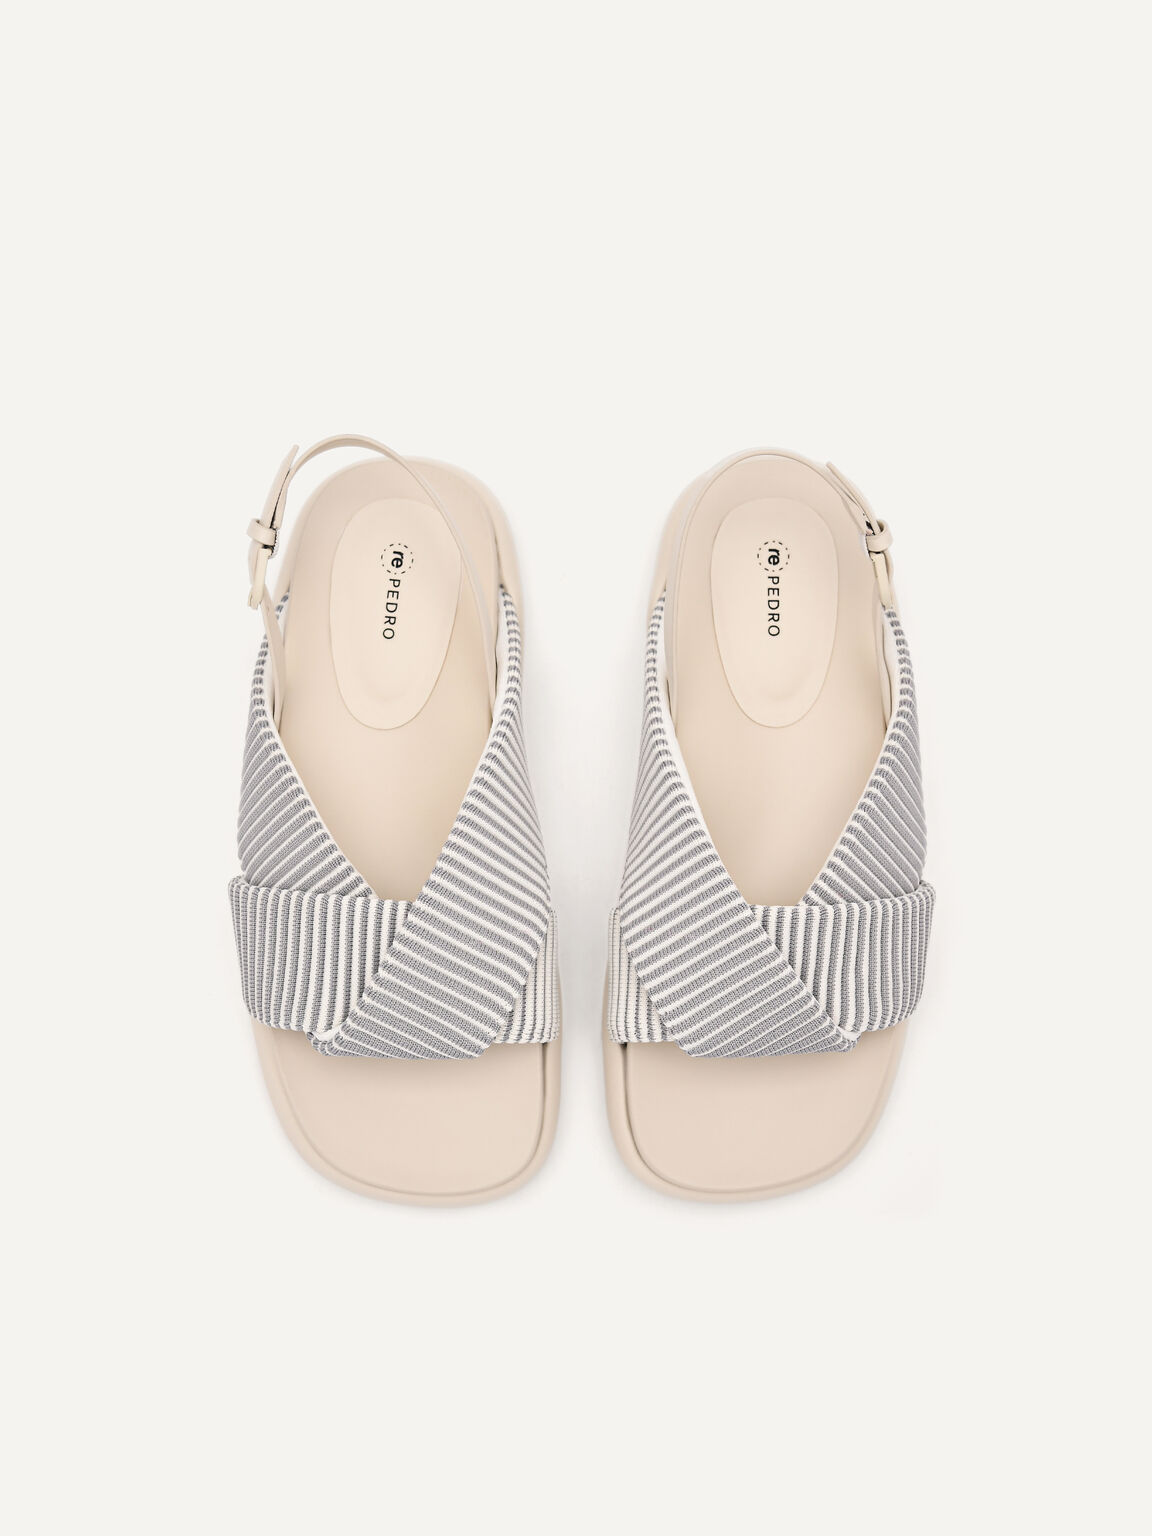 rePEDRO Pleated Sandals, Light Grey